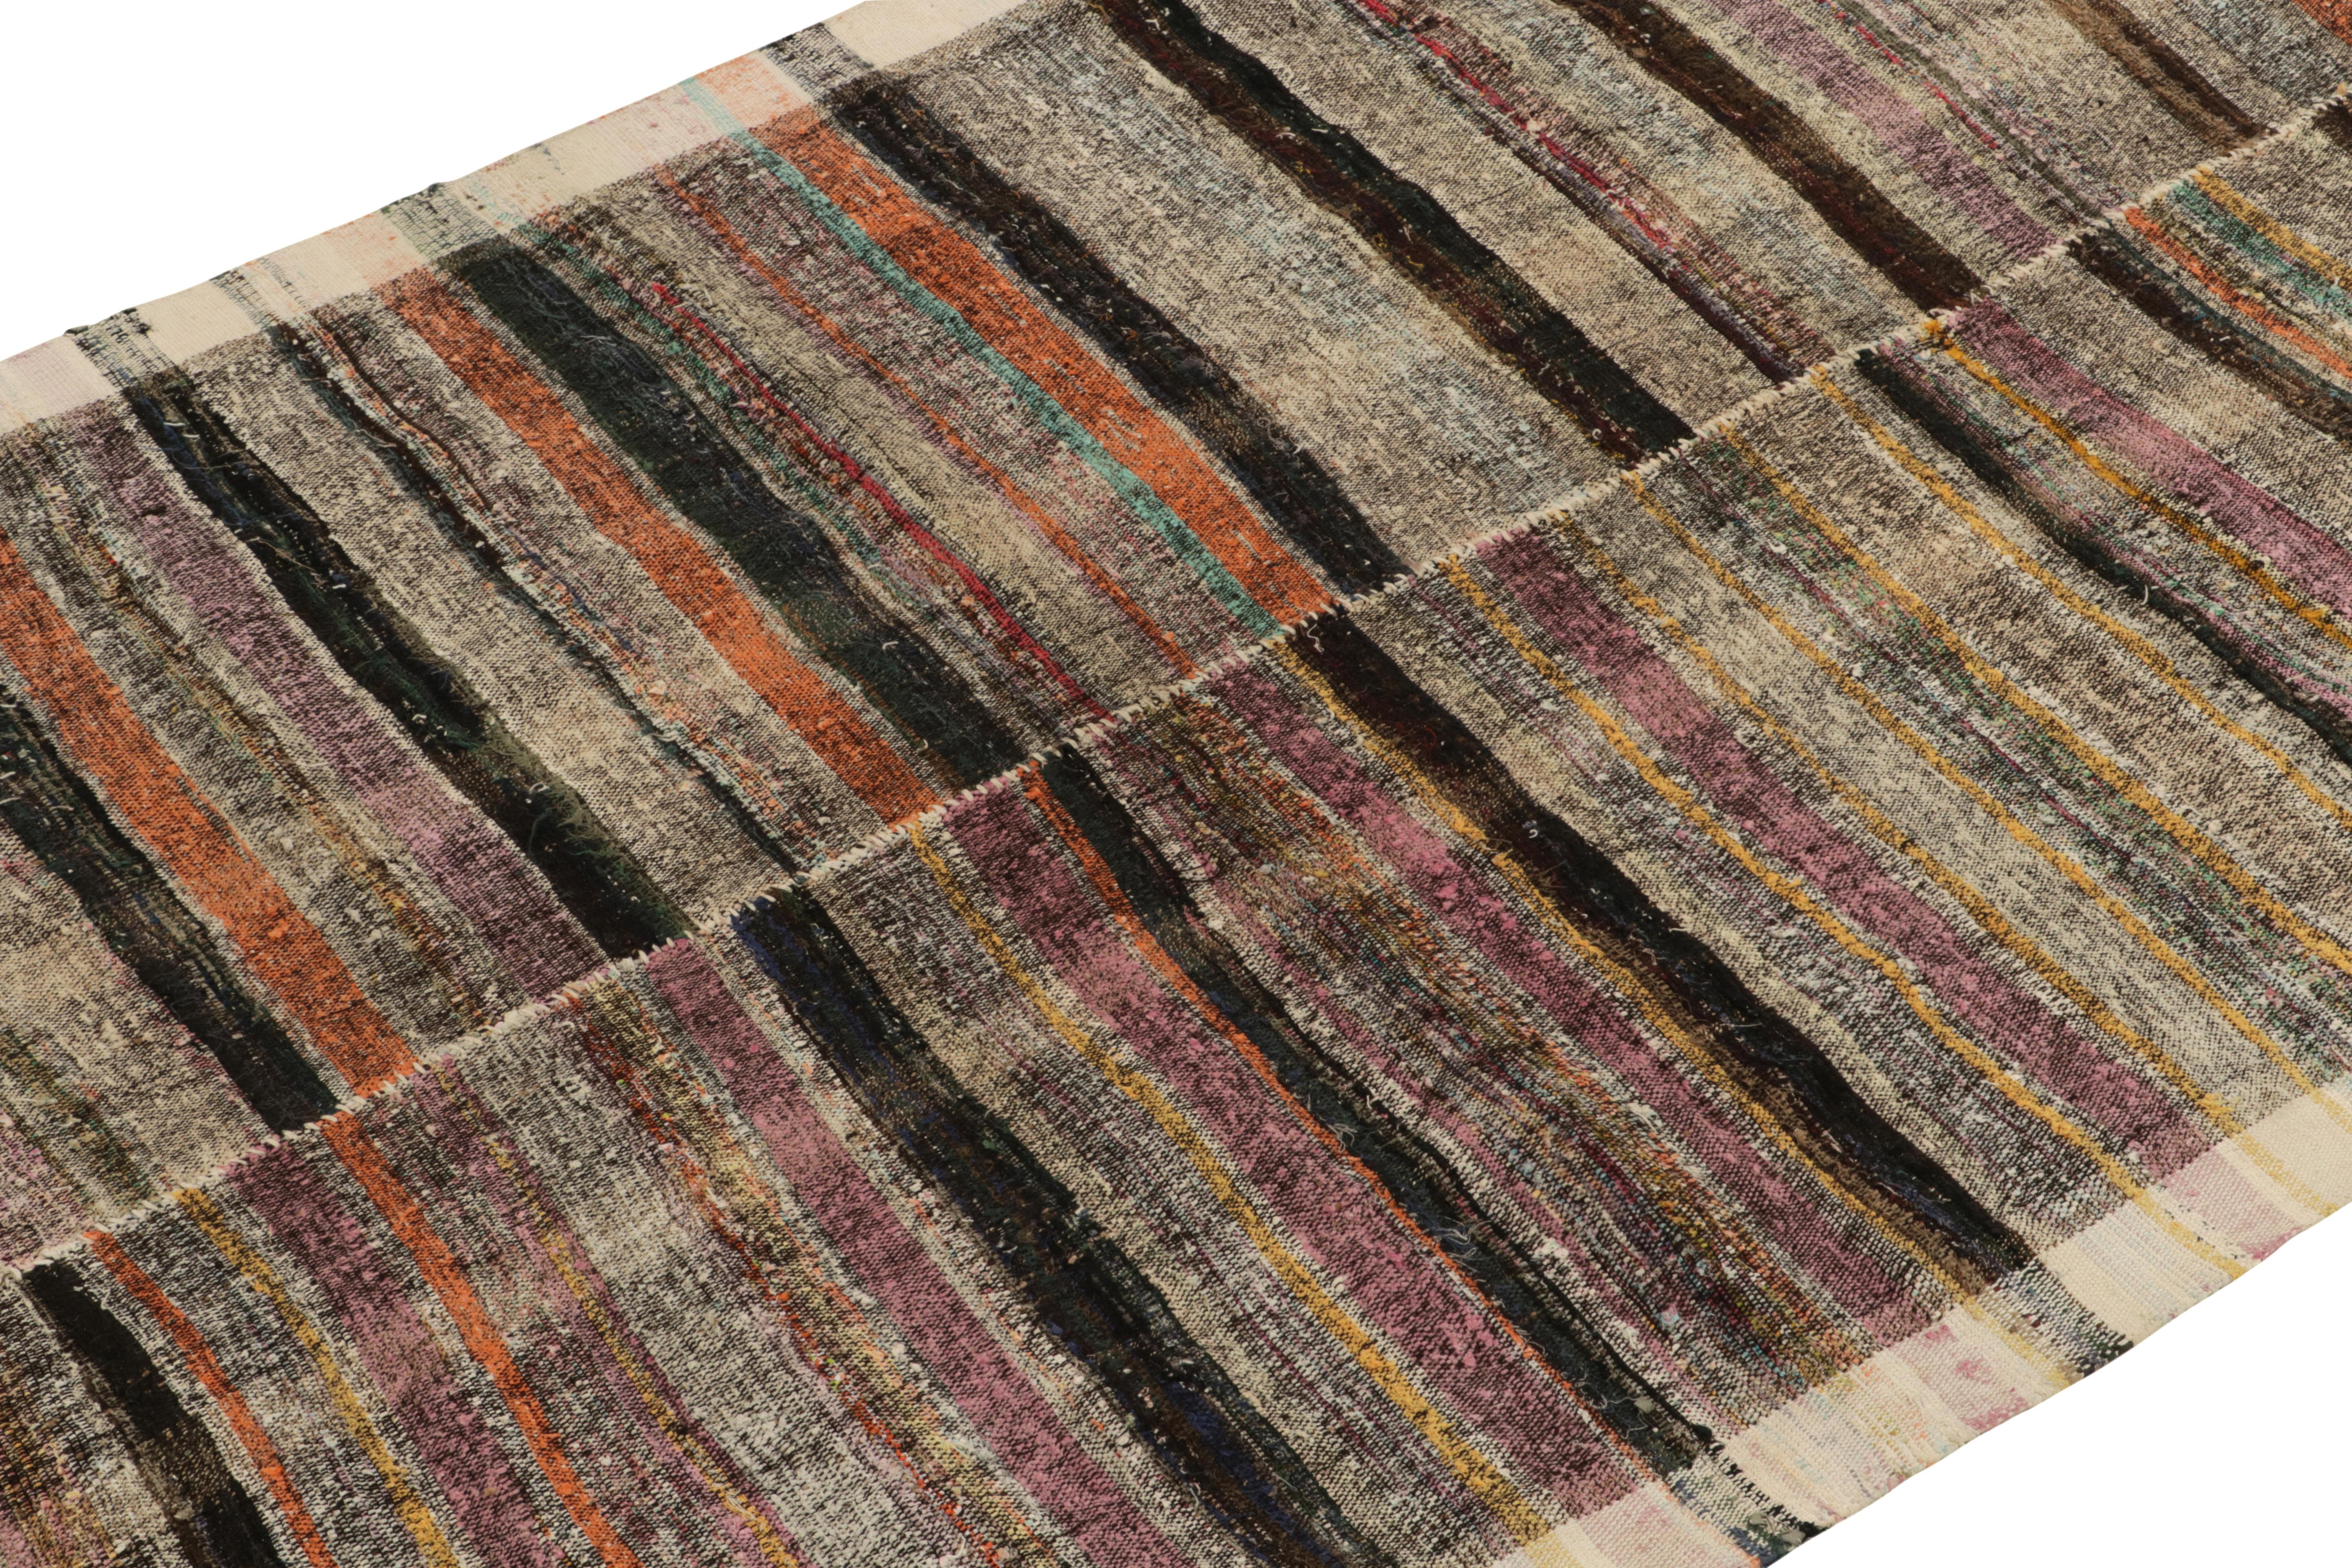 Persian 1950s Vintage Turkish Kilim Rug in Panel Style Stripe Patterns by Rug & Kilim For Sale